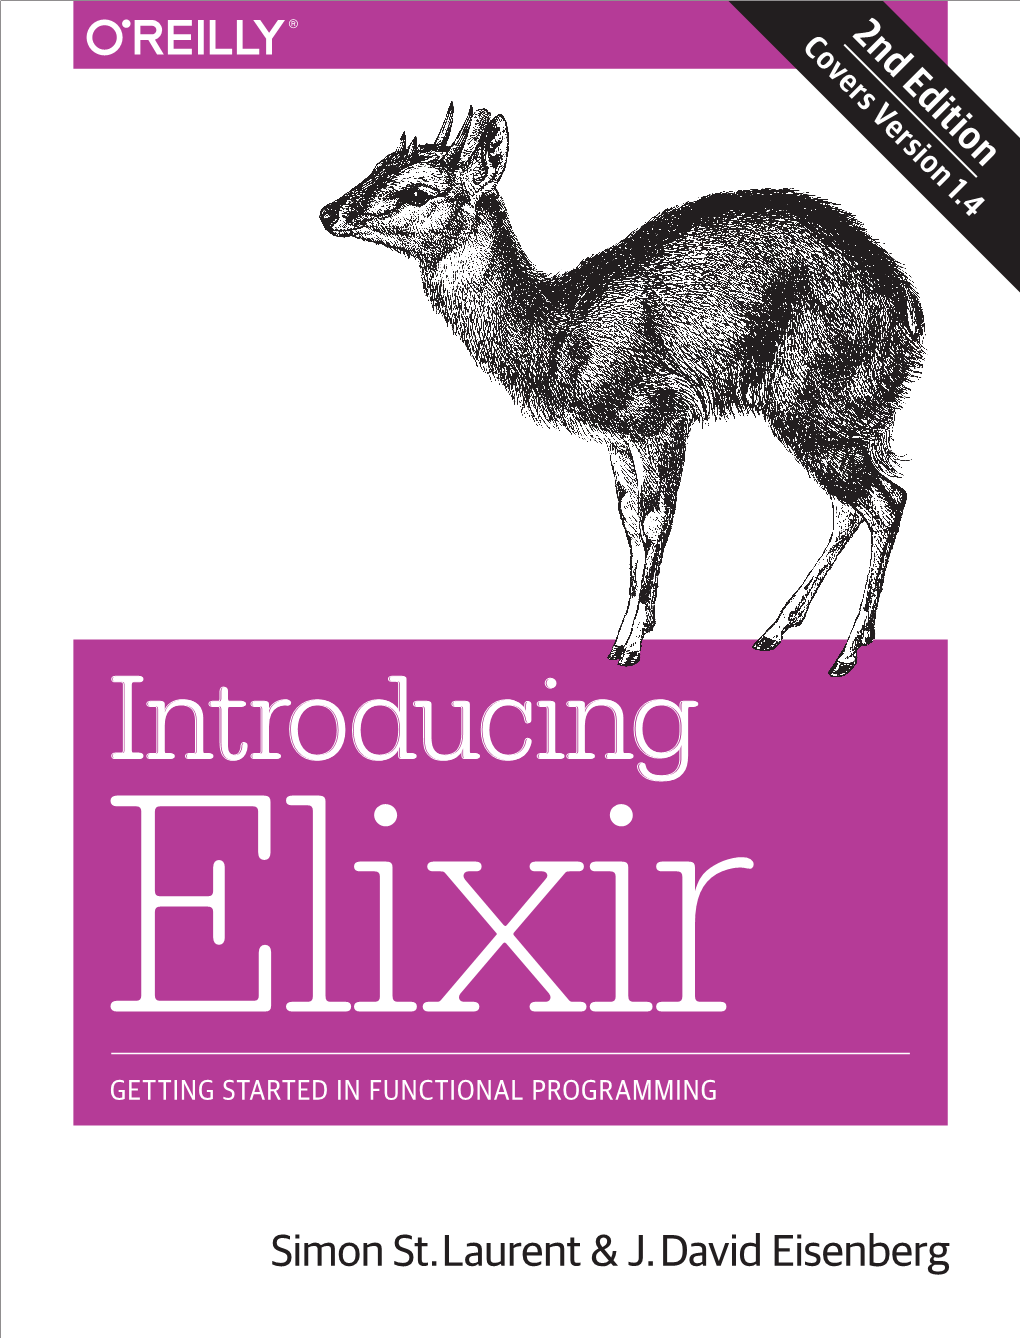 Introducing Elixir GETTING STARTED in FUNCTIONAL PROGRAMMING